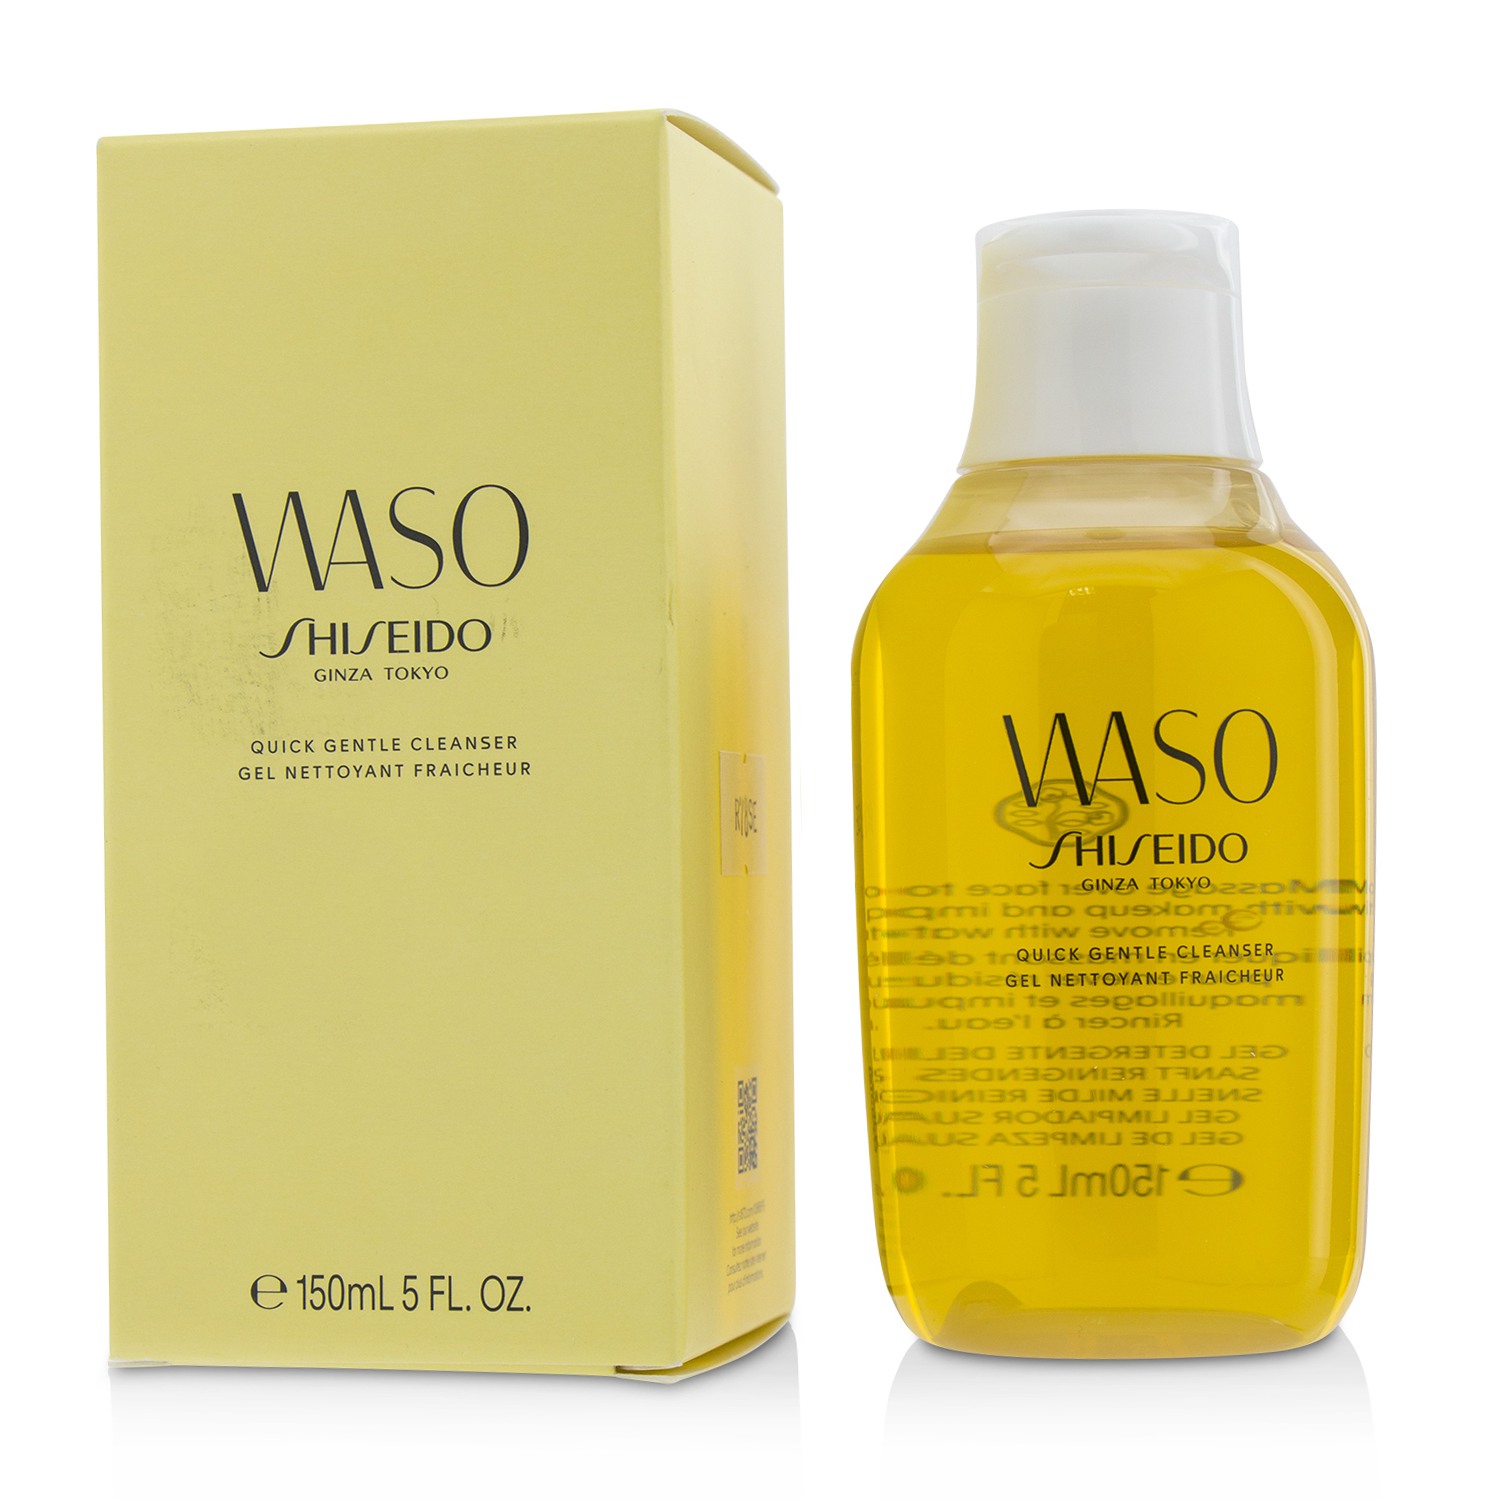 Waso Quick Gentle Cleanser Shiseido Image